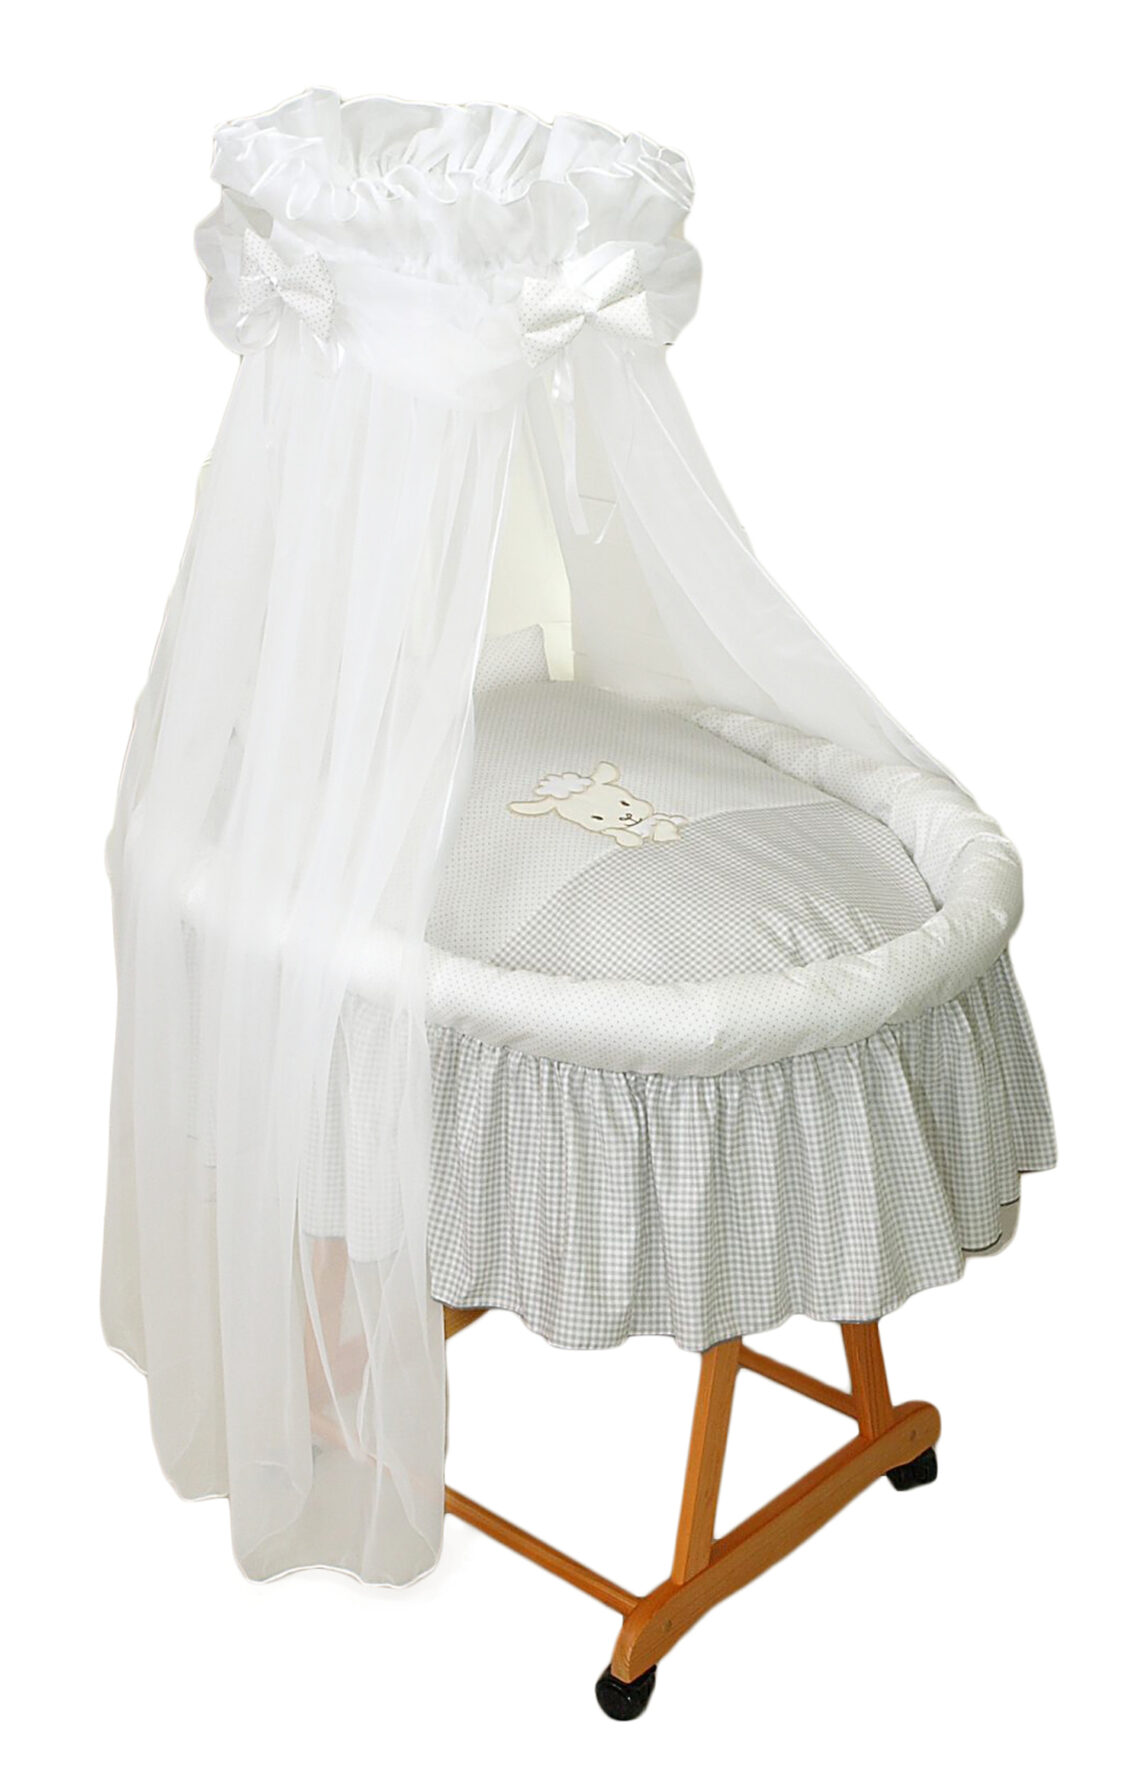 Moses basket with bedding for AMY child